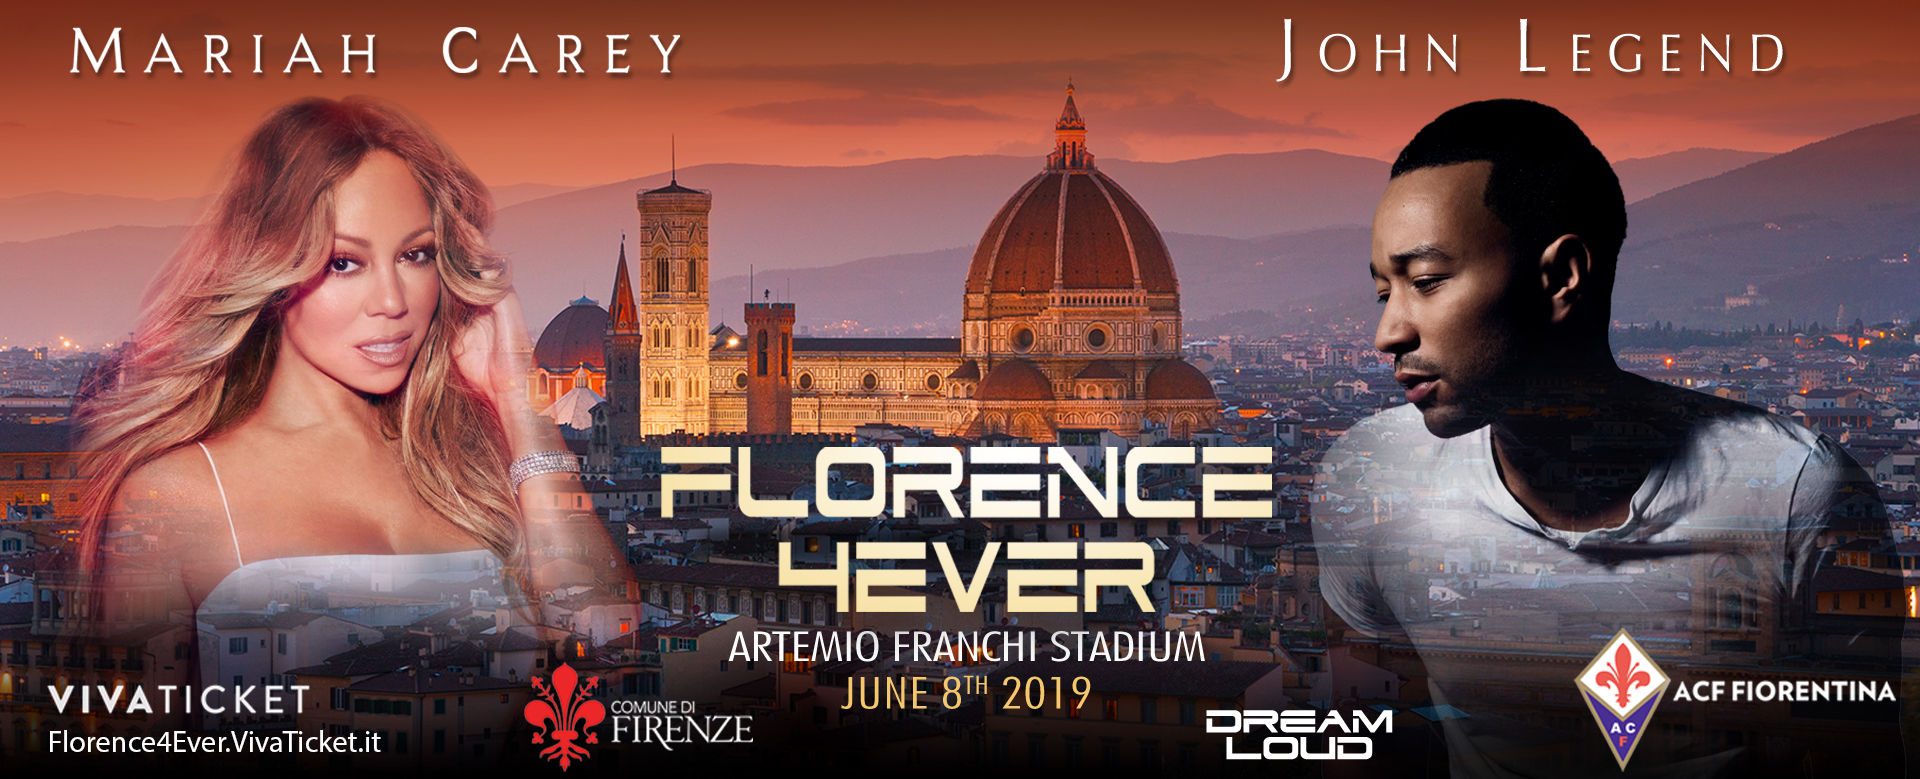 Florence4Ever poster with Mariah Carey and John Legend